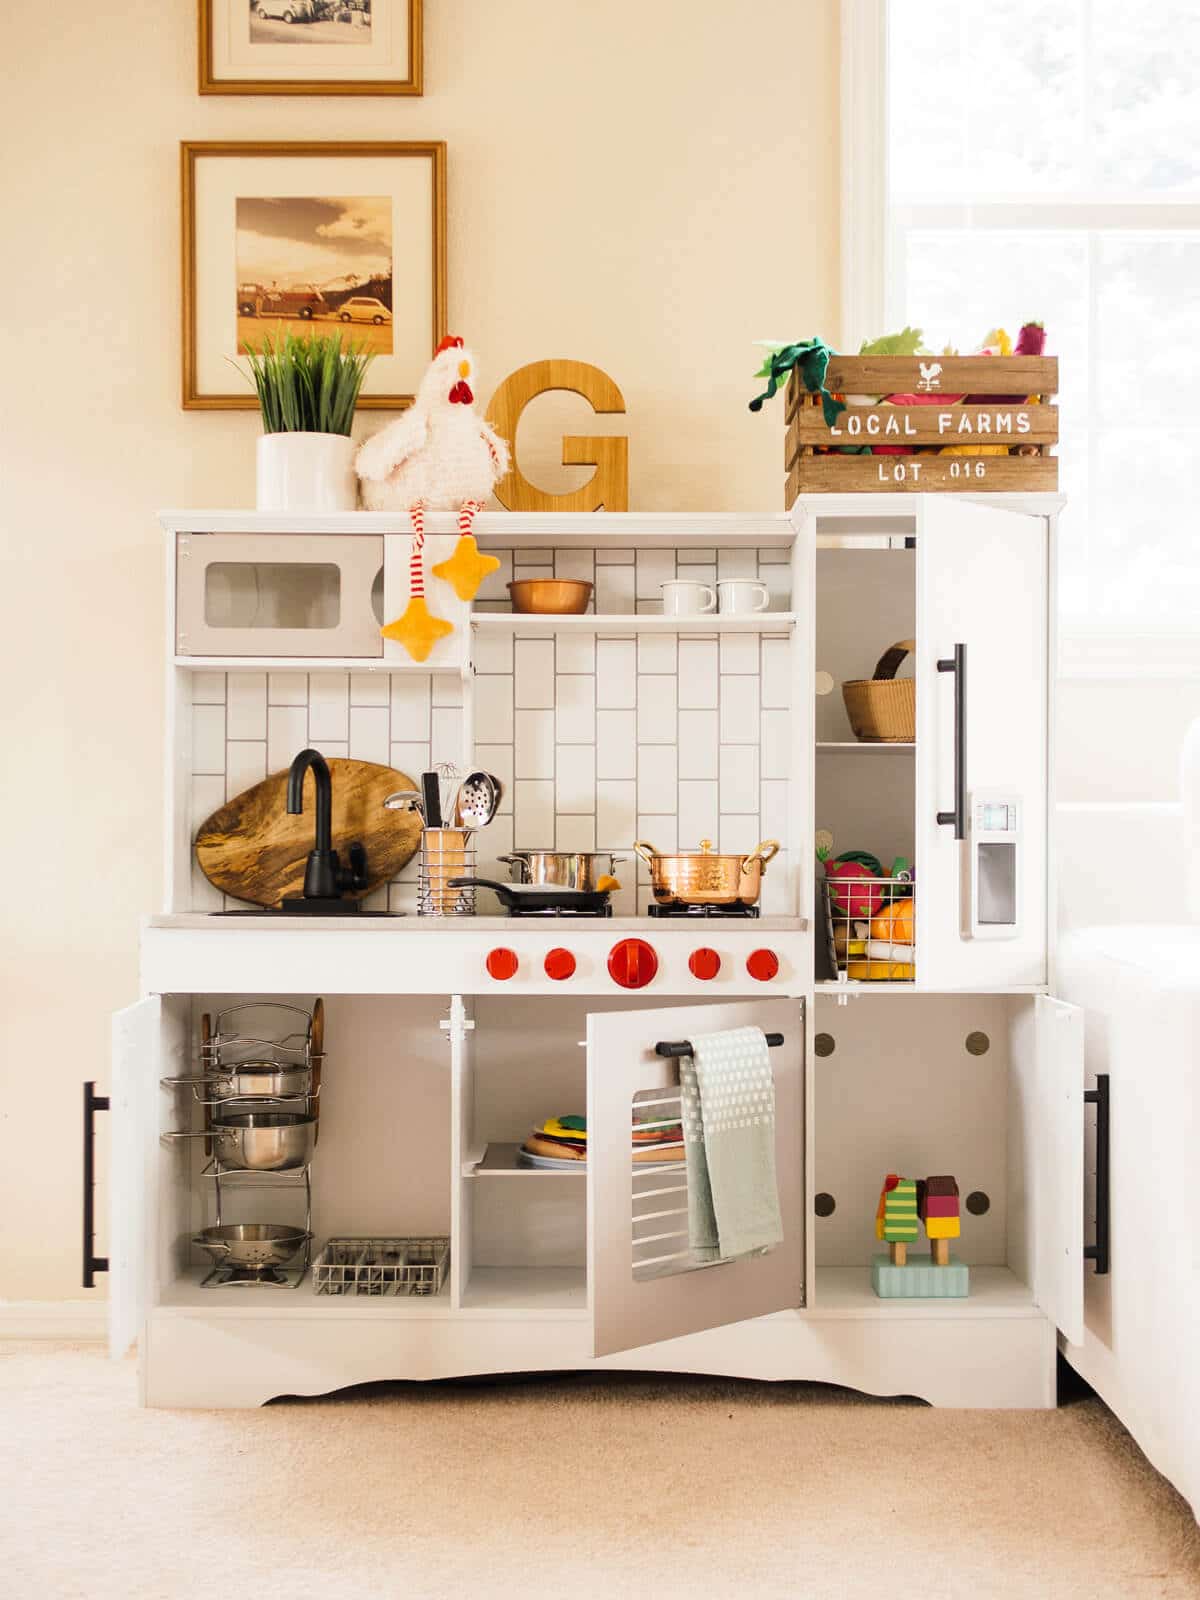 A play kitchen makeover DIY